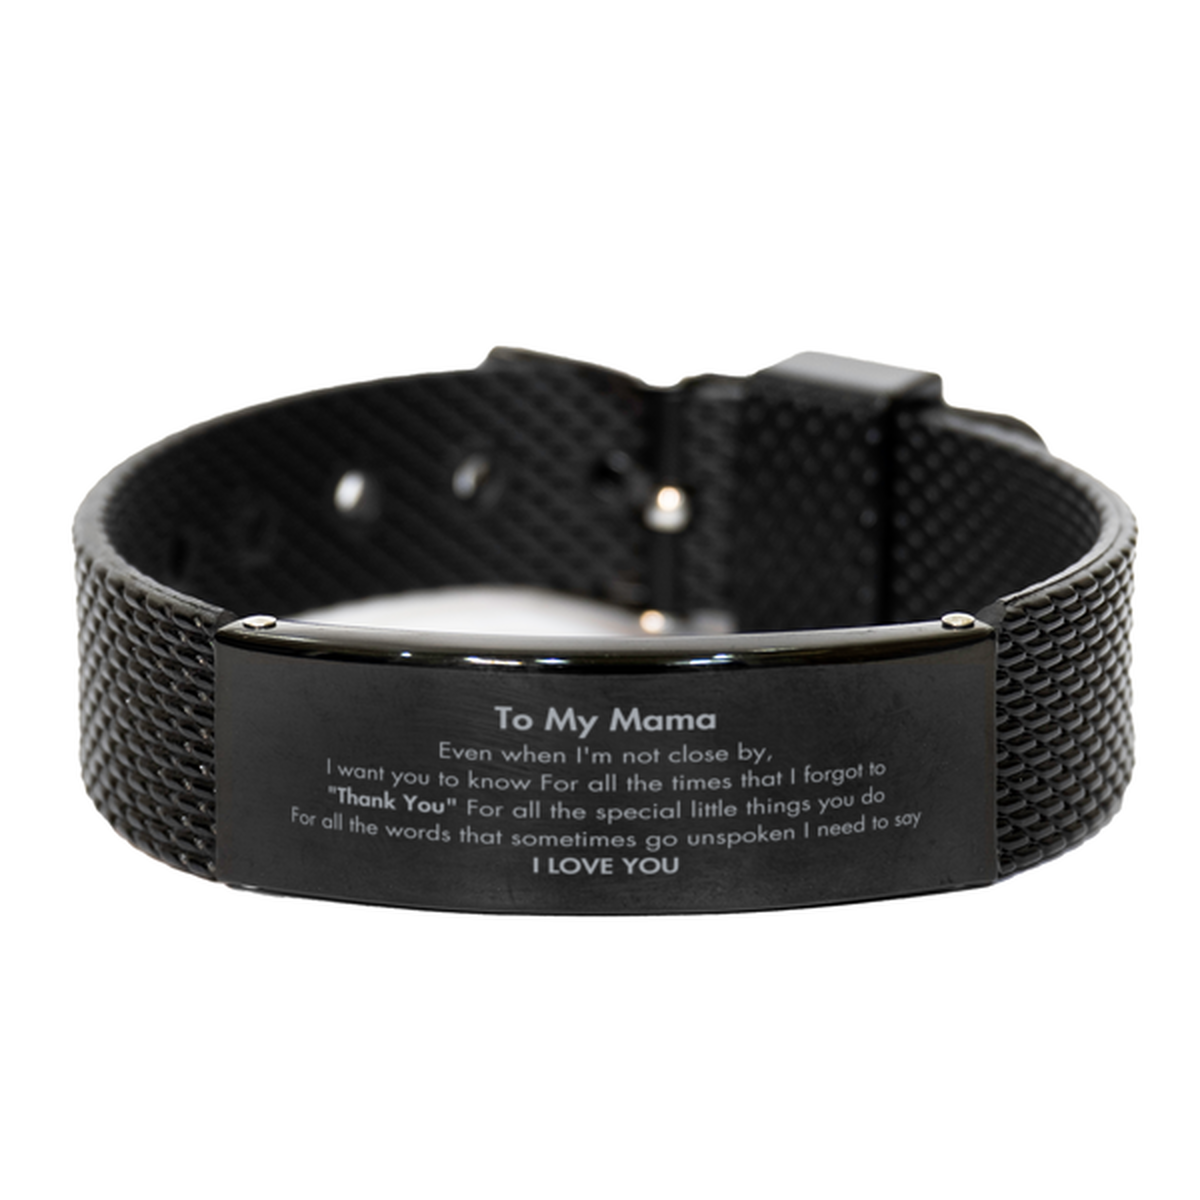 Thank You Gifts for Mama, Keepsake Black Shark Mesh Bracelet Gifts for Mama Birthday Mother's day Father's Day Mama For all the words That sometimes go unspoken I need to say I LOVE YOU